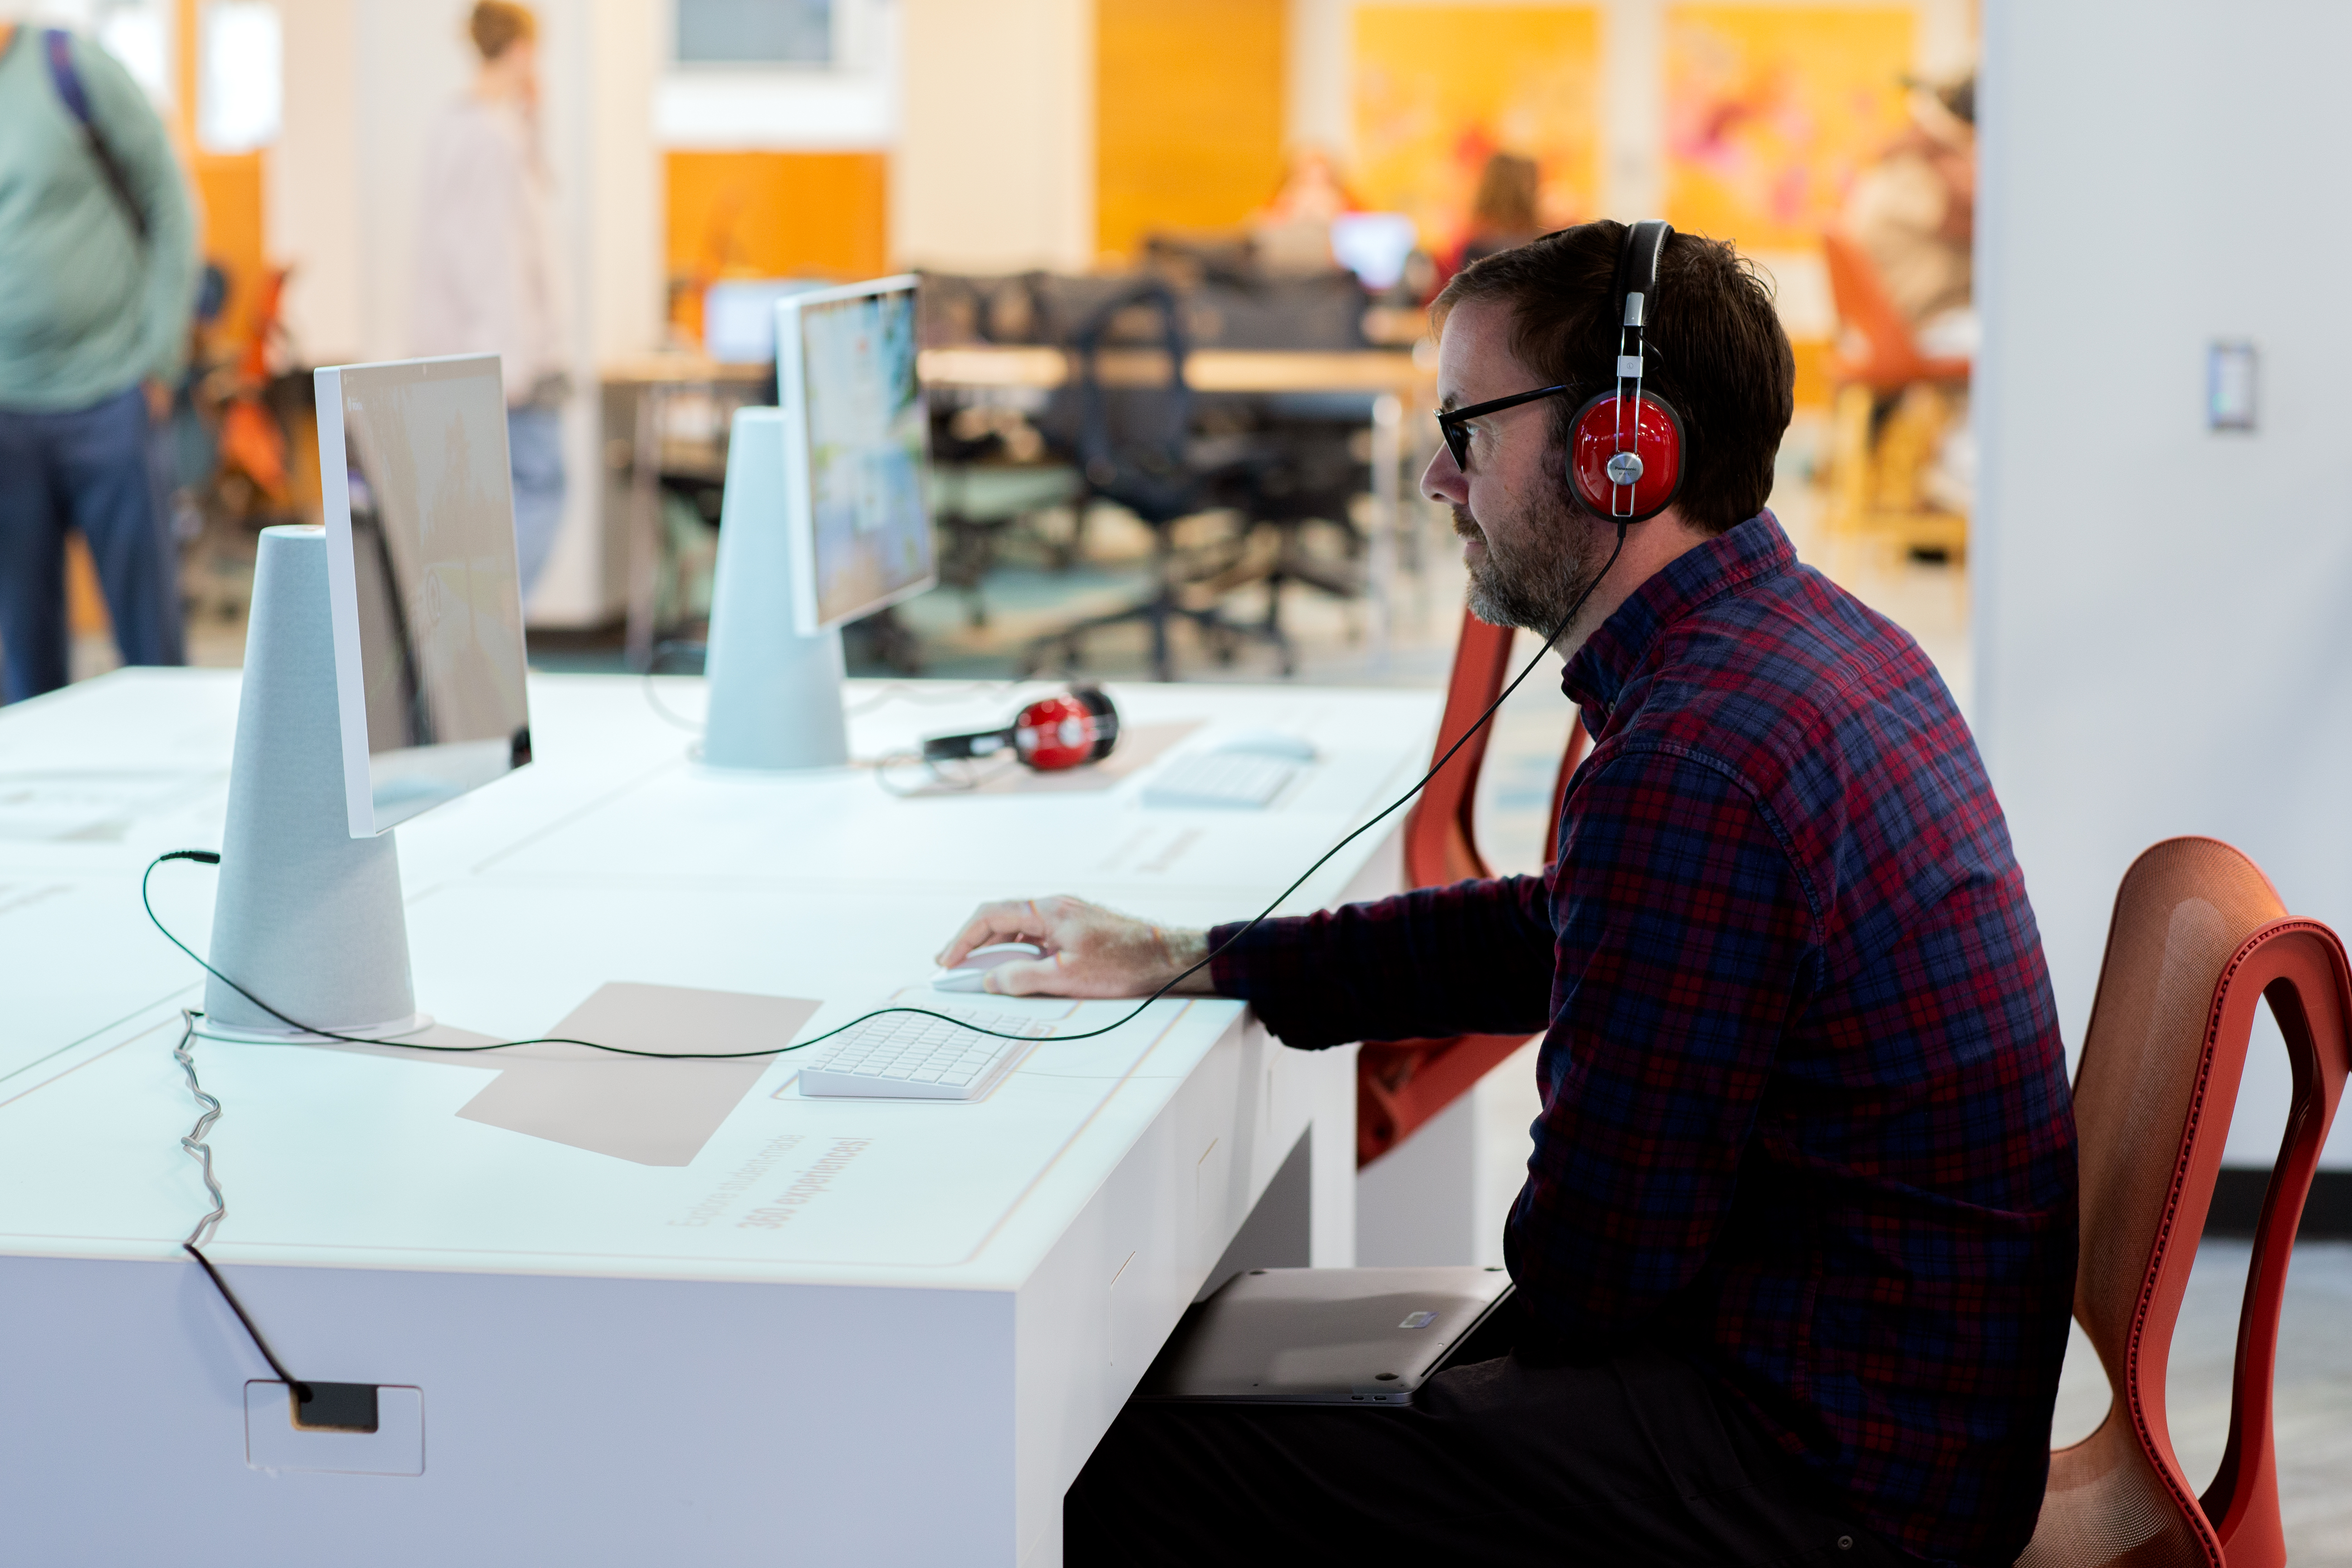 A visitor views an exhibit on a computer, wearing attached headphones.